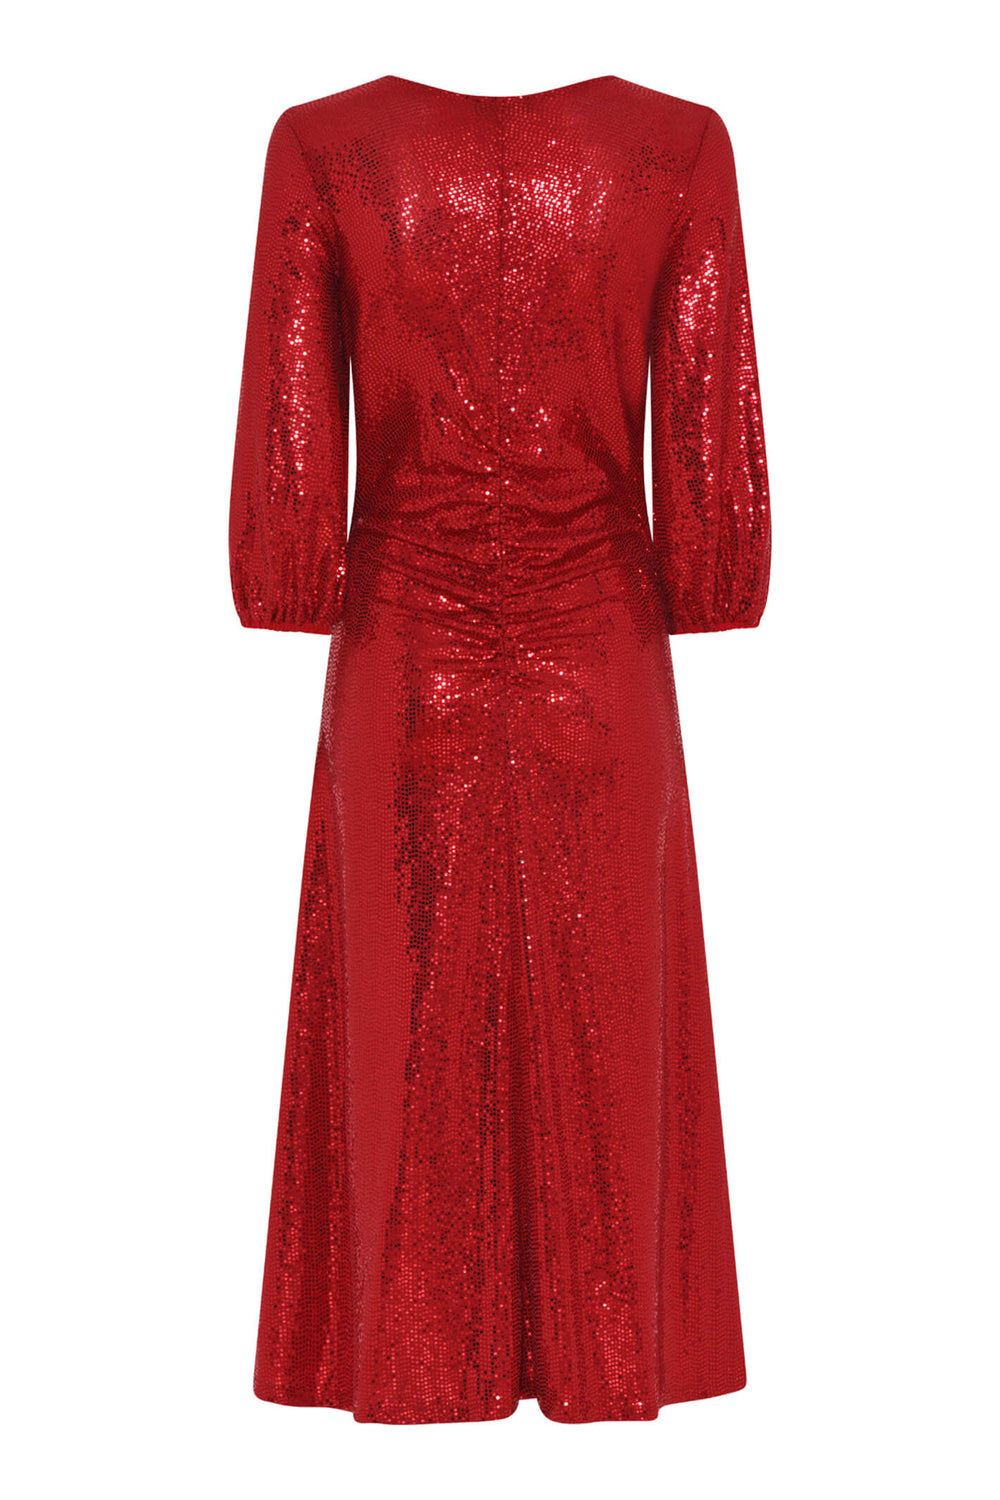 Tia 78519 47 Red Sequin Midi Cocktail Dress - Experience Boutique